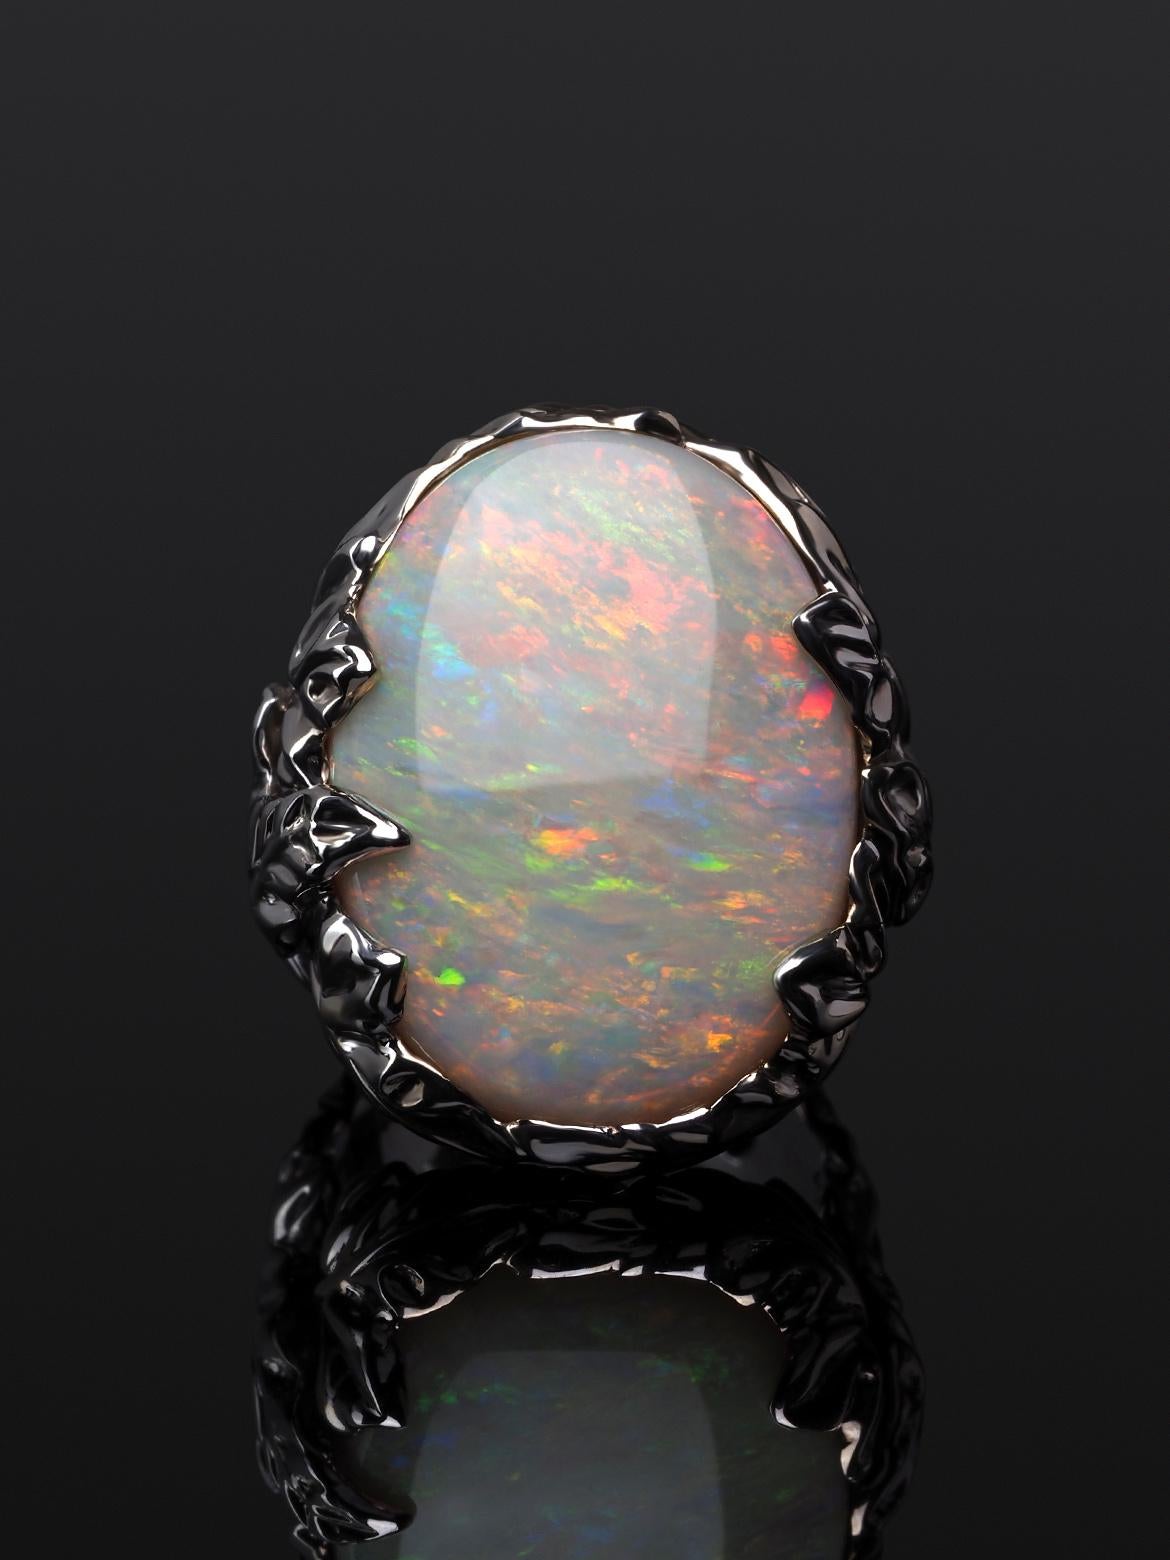 Aura ring with natural Australian Opal in 18K white gold
opal origin - Australia
ring size - 9 US
ring weight - 34 grams
opal measurements 0.2 x 0.79 x 0.98 in / 5 х 20 x 25 mm
opal weight - 20.8 ct